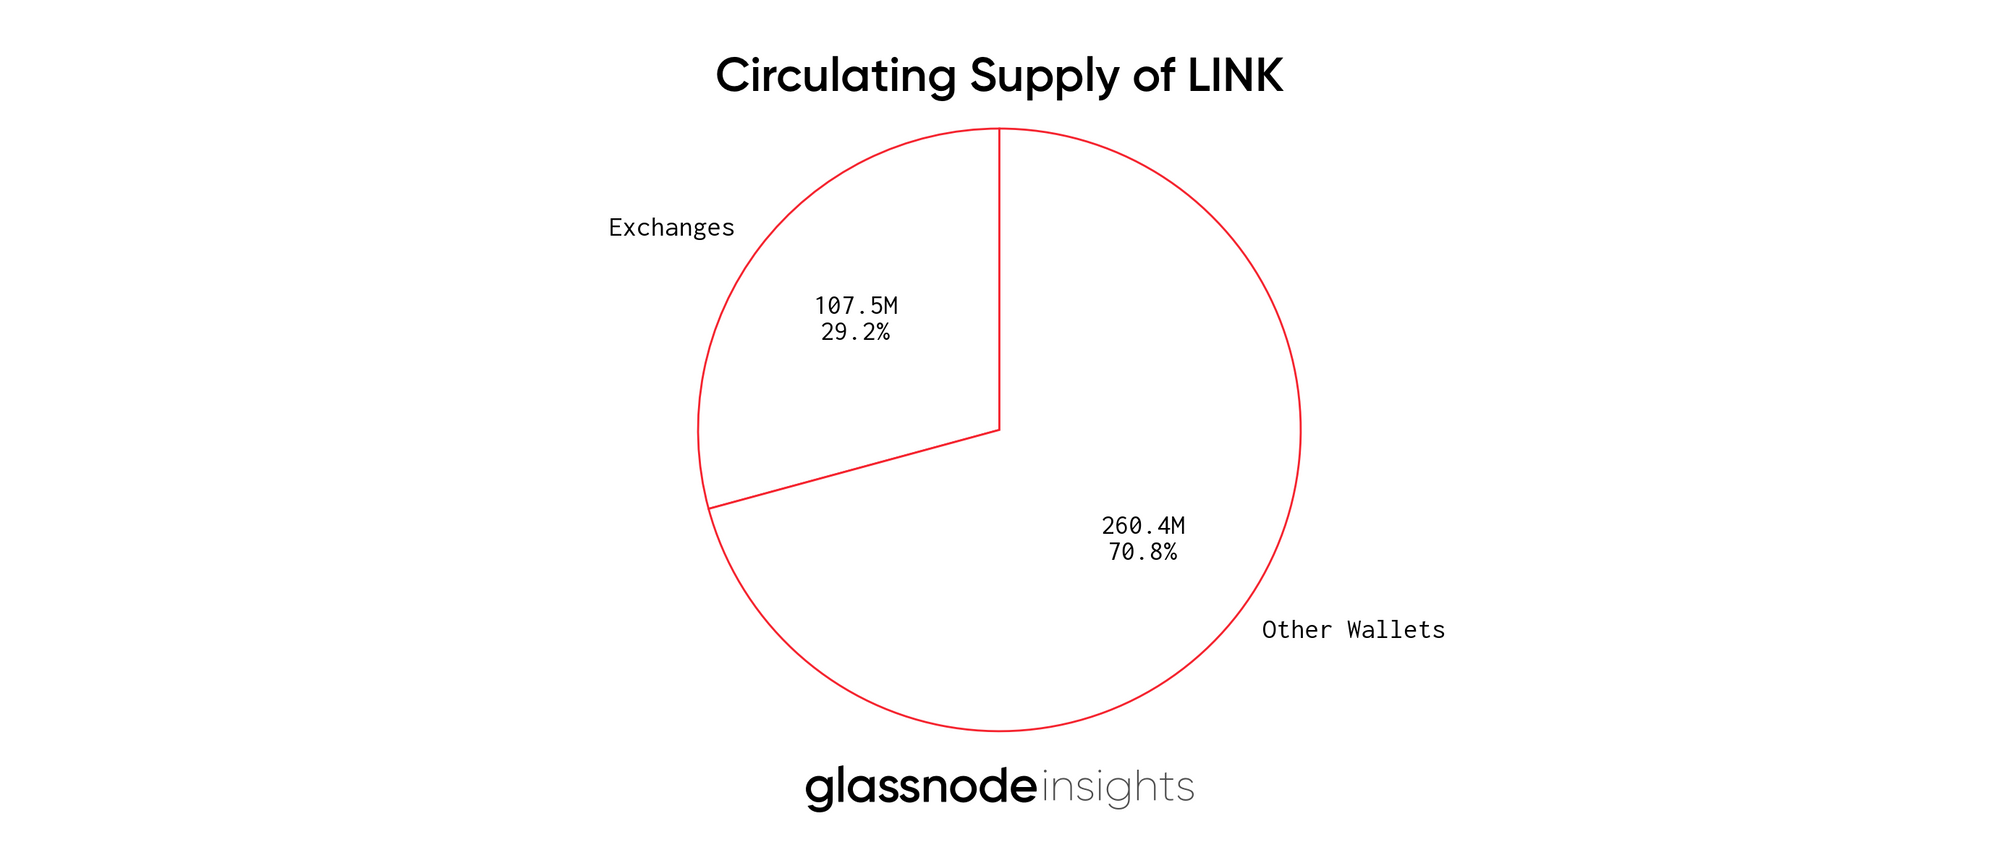 Chainlink (LINK) Price Today | LINK Live Price Charts | Revolut United Kingdom